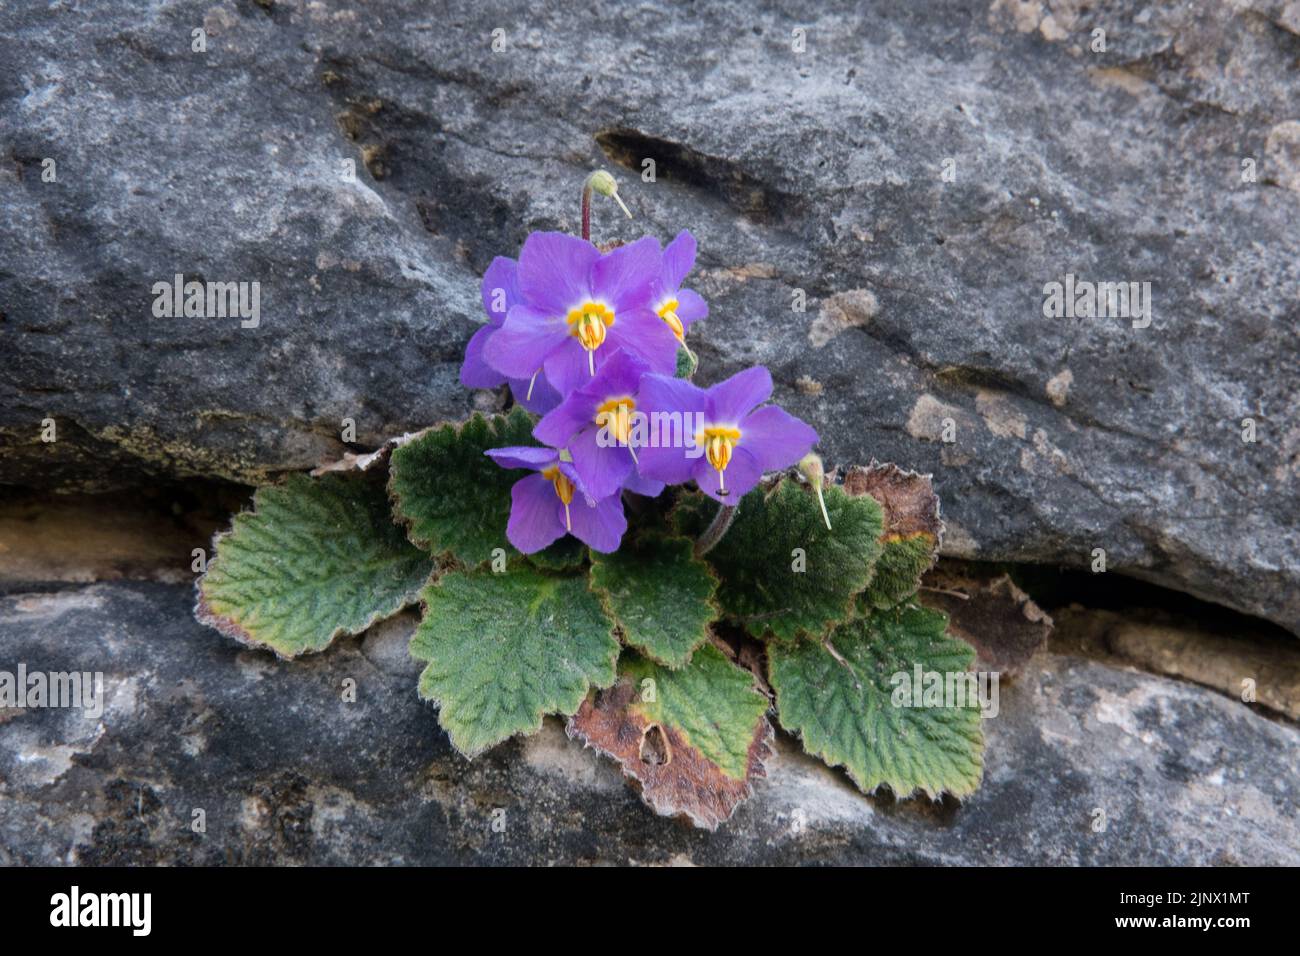 Pyrenean-violet, a small plant with purple flowers, growing in a rock crevice Stock Photo